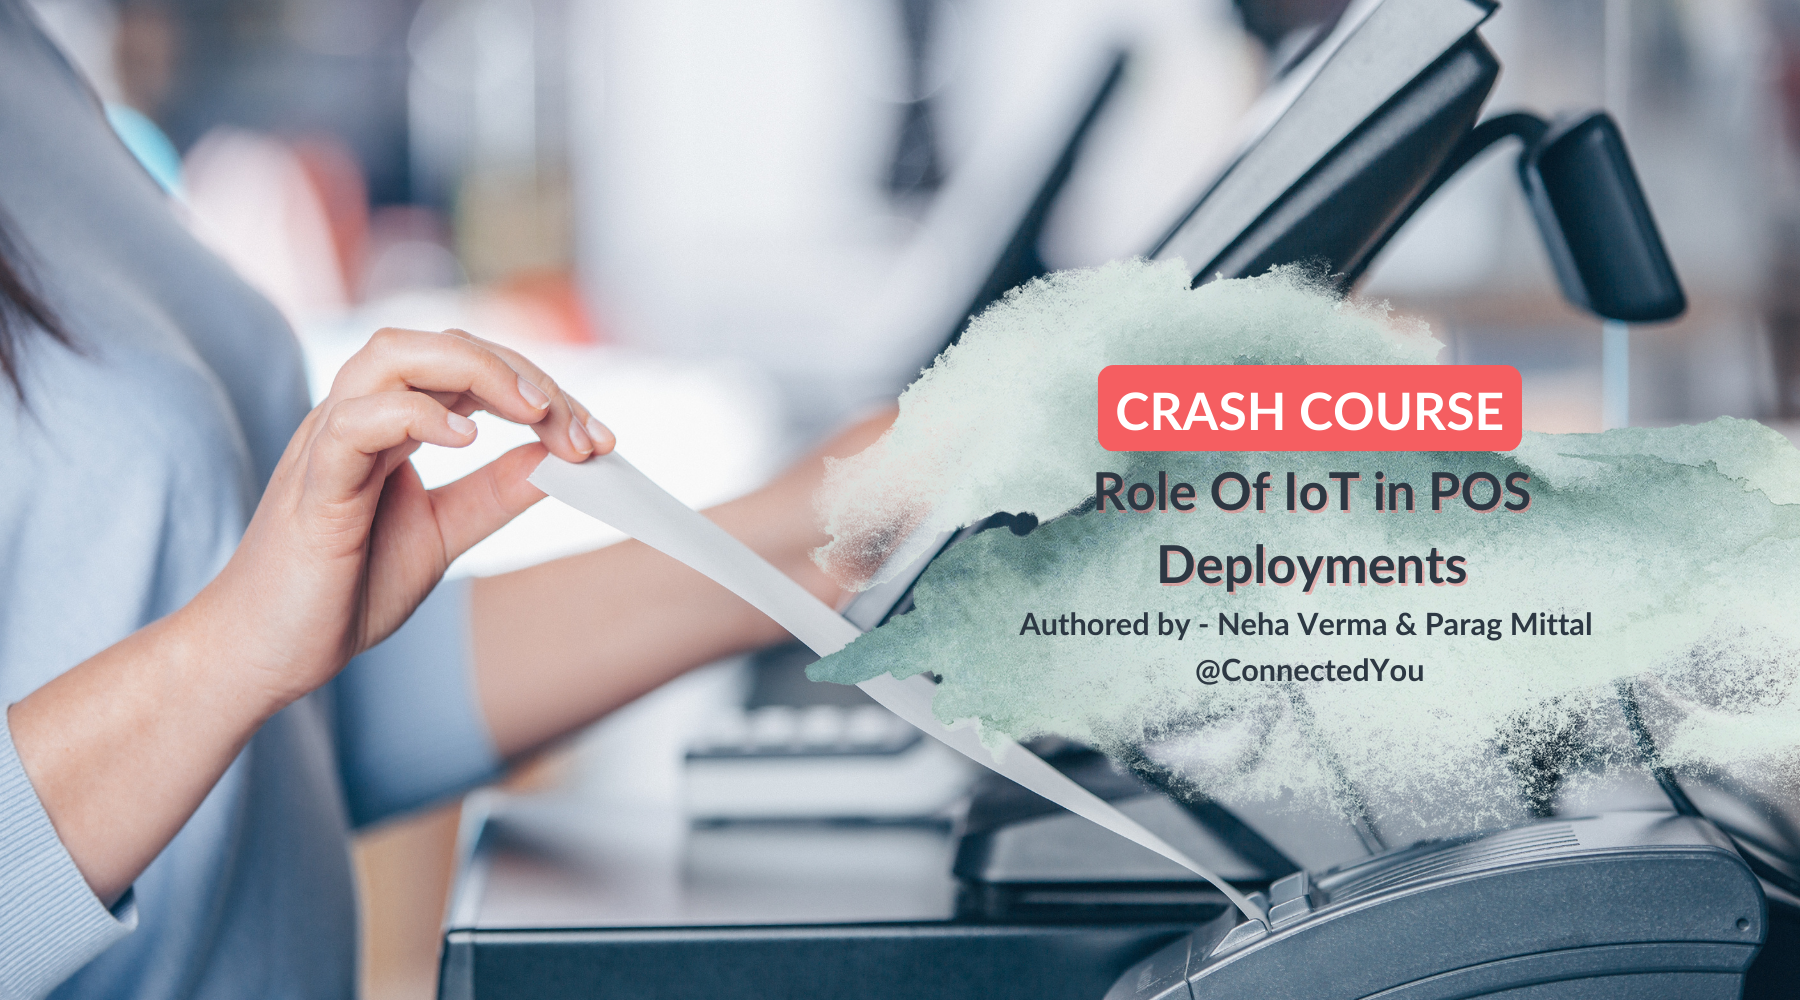 Role Of IoT In POS Deployments